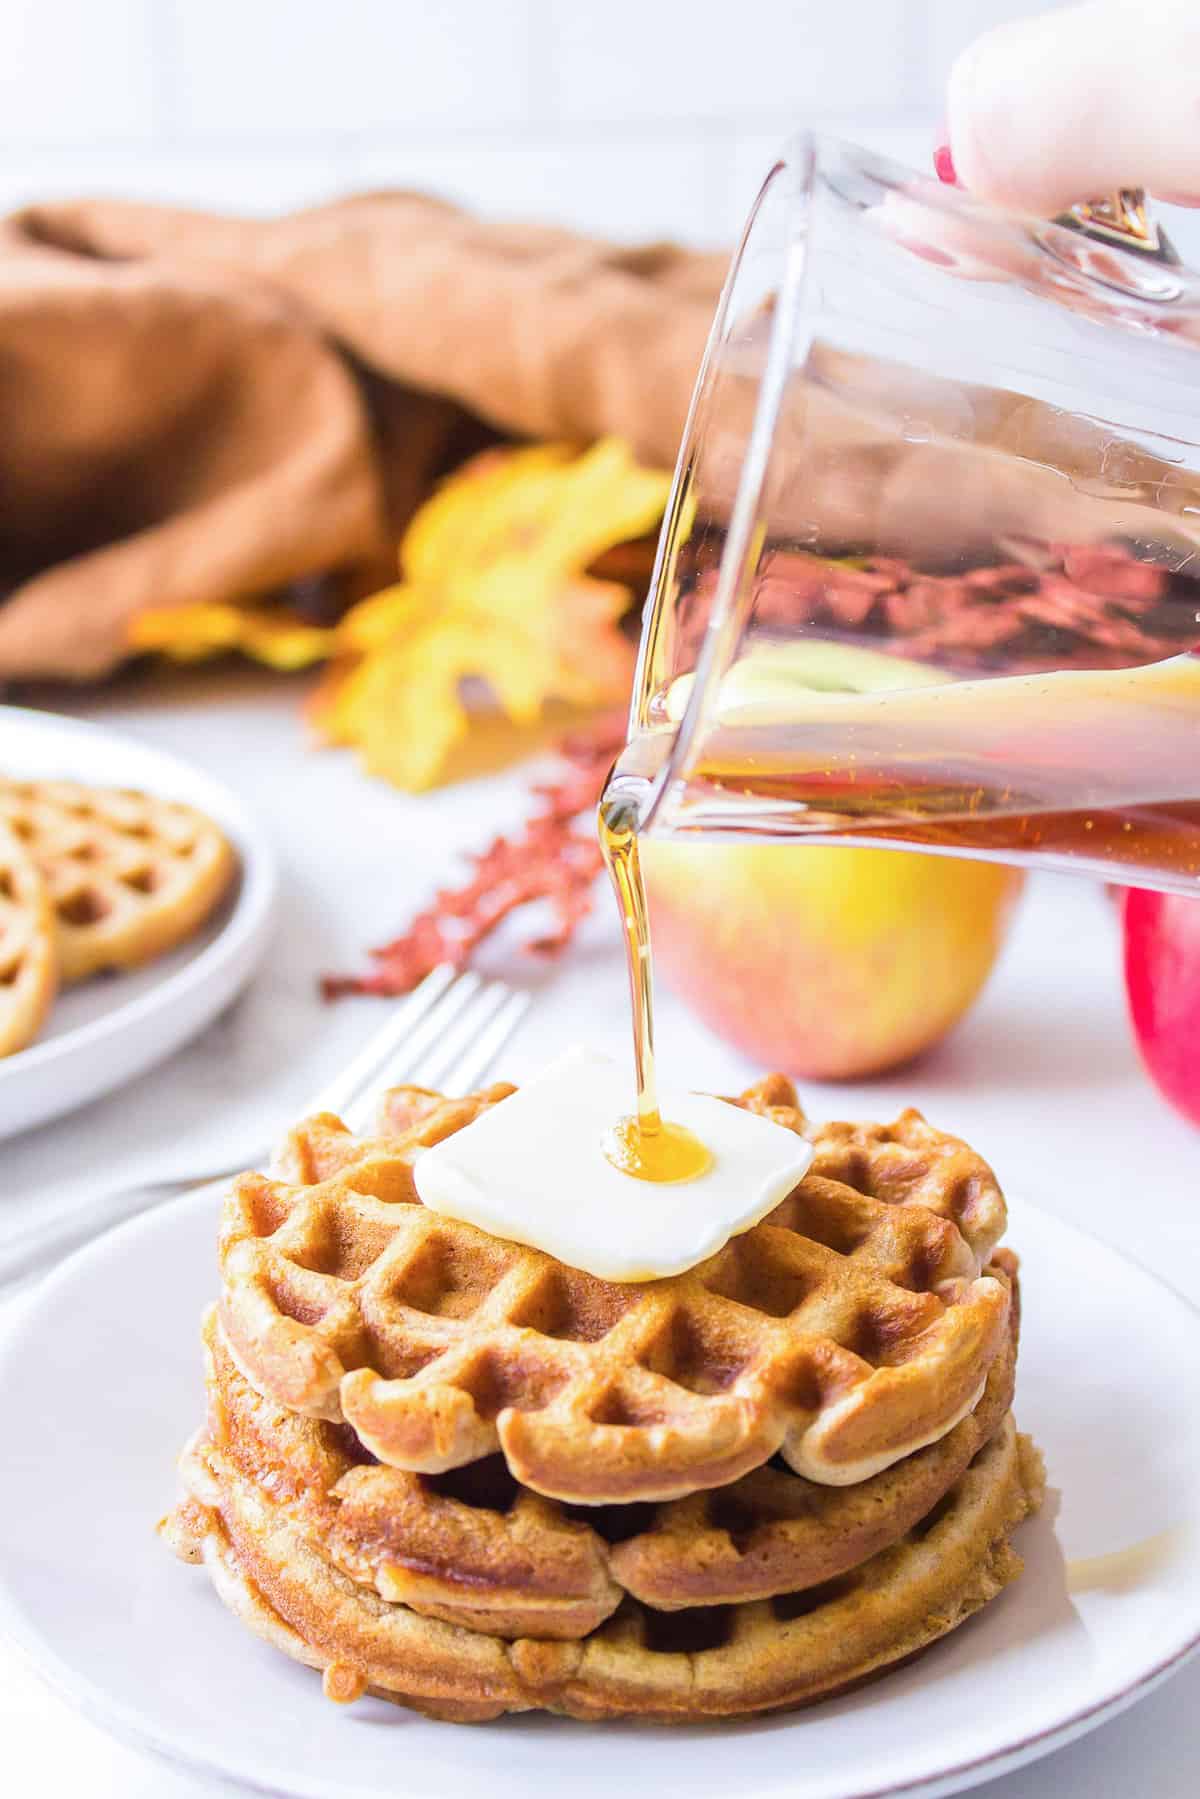 Syrup being poured on waffles.